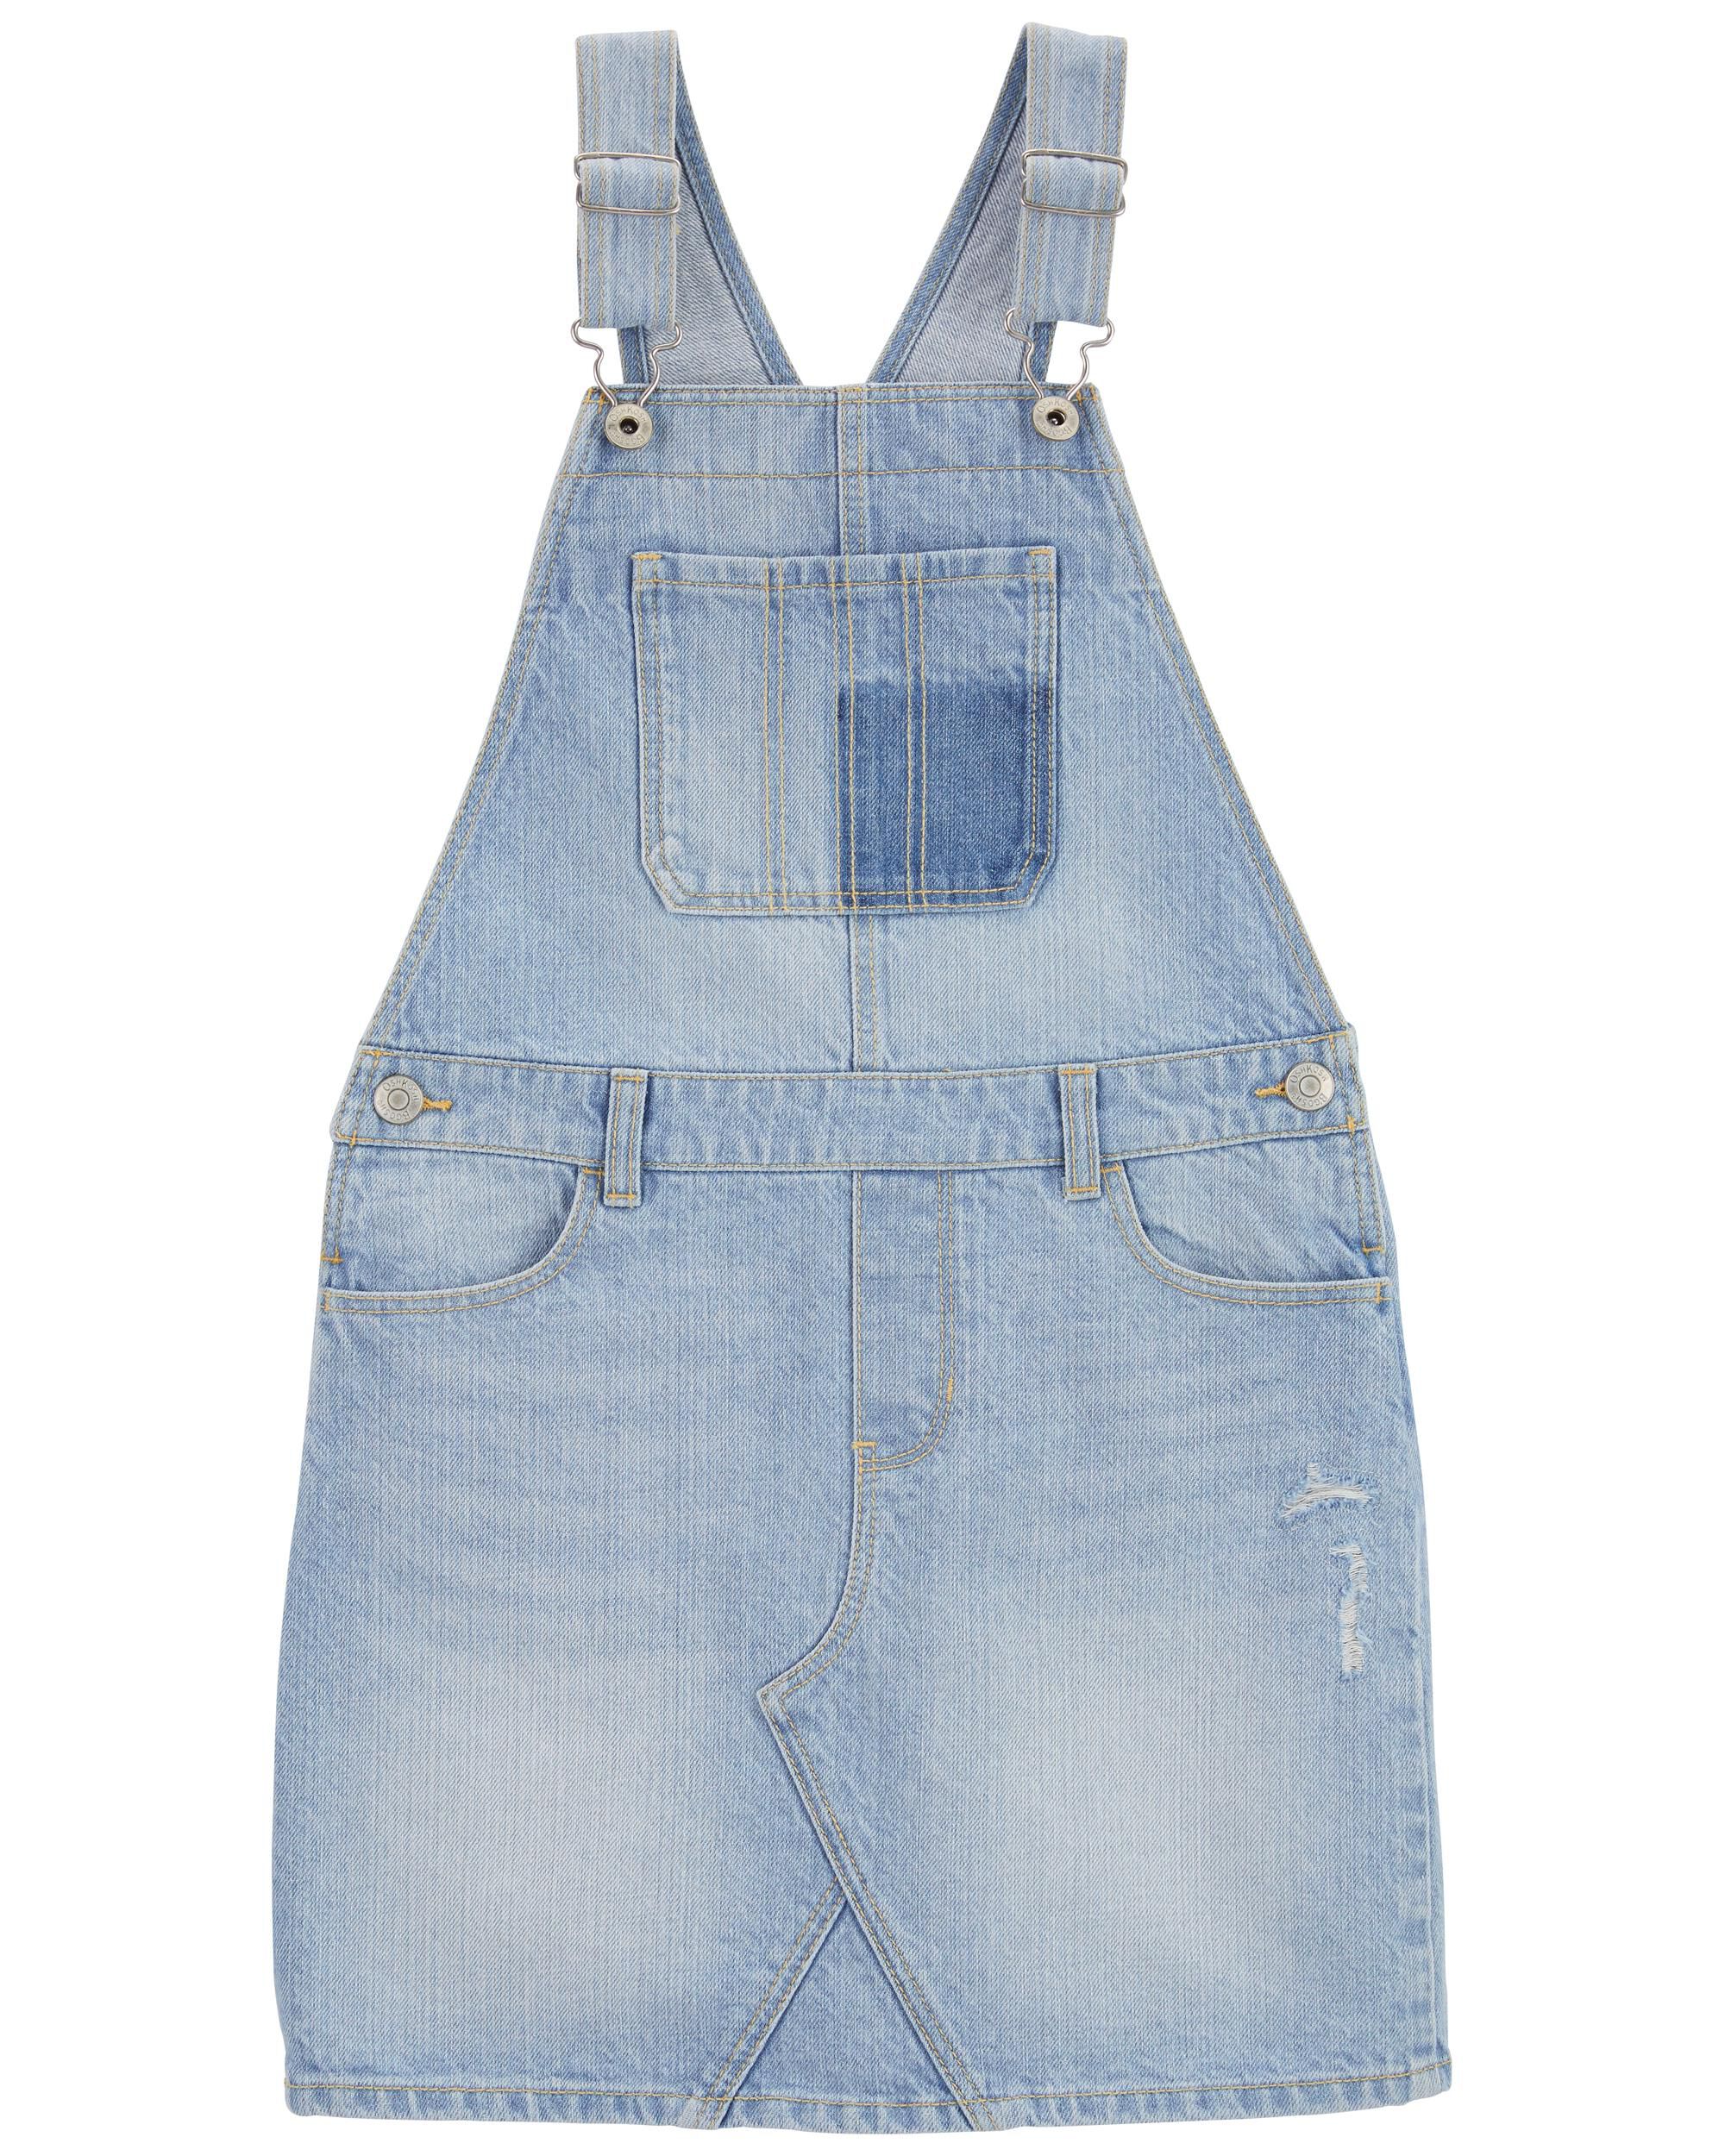 Boys Dungarees - Buy Boys Dungarees Online at Best Price in India | Suvidha  Stores